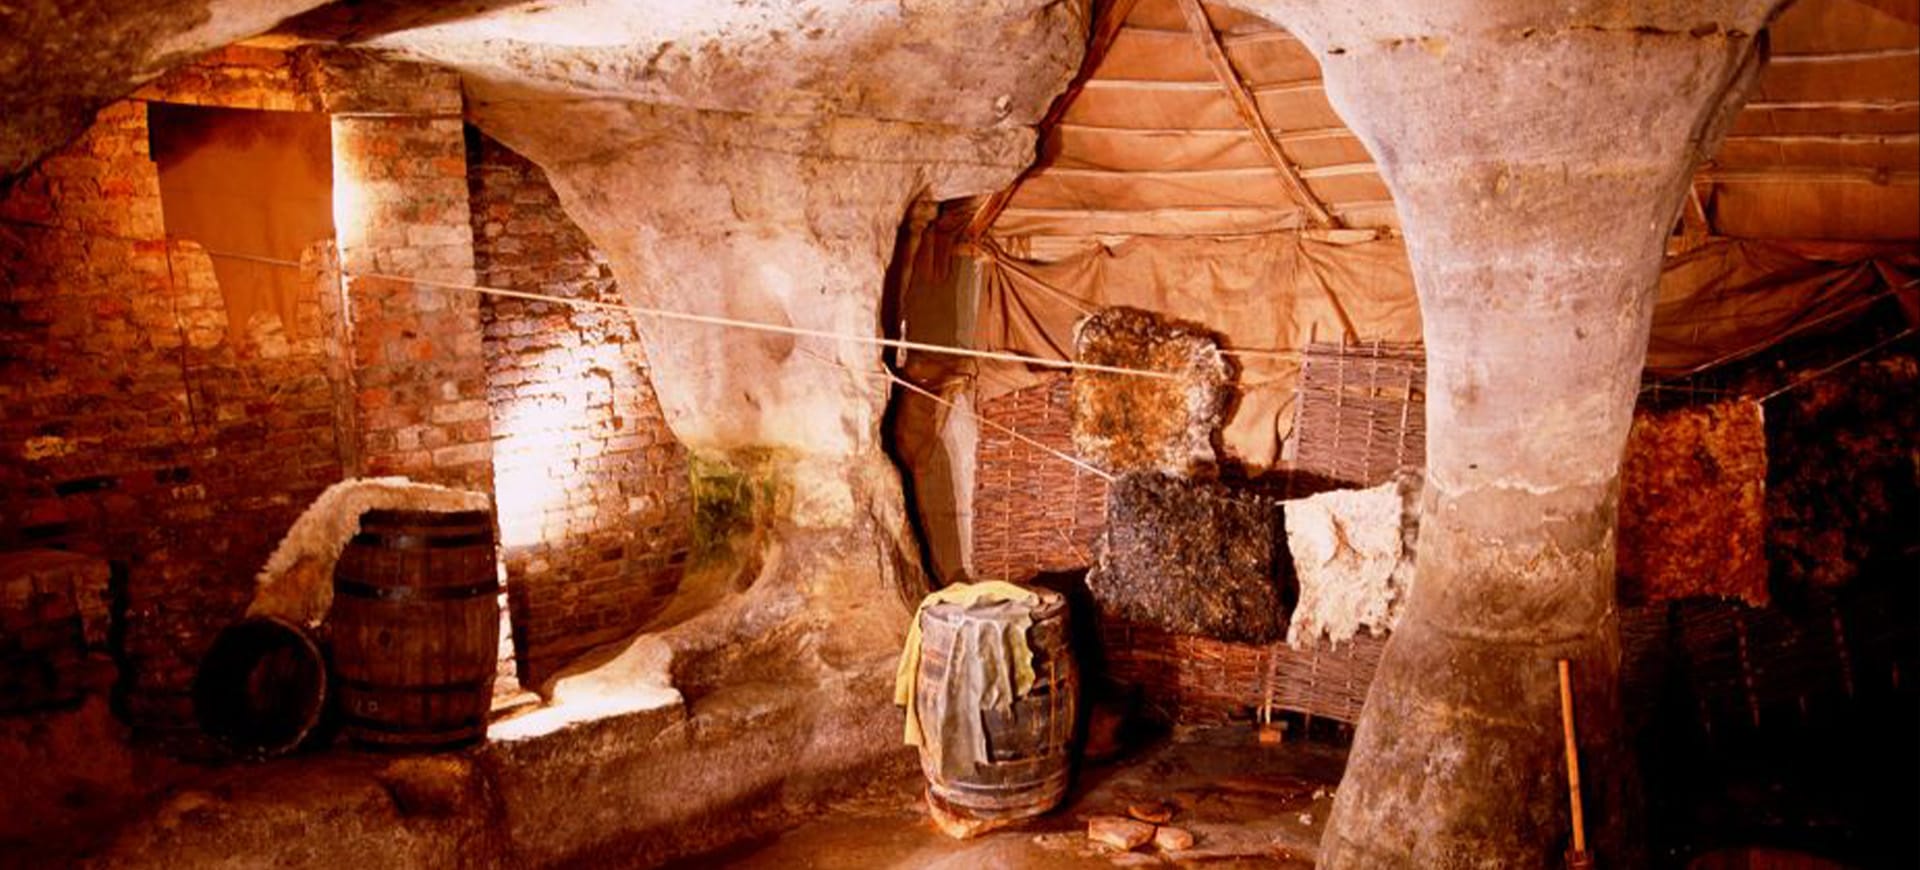 The inside of a cave with animal skins hung up and barrels of dyed fabrics